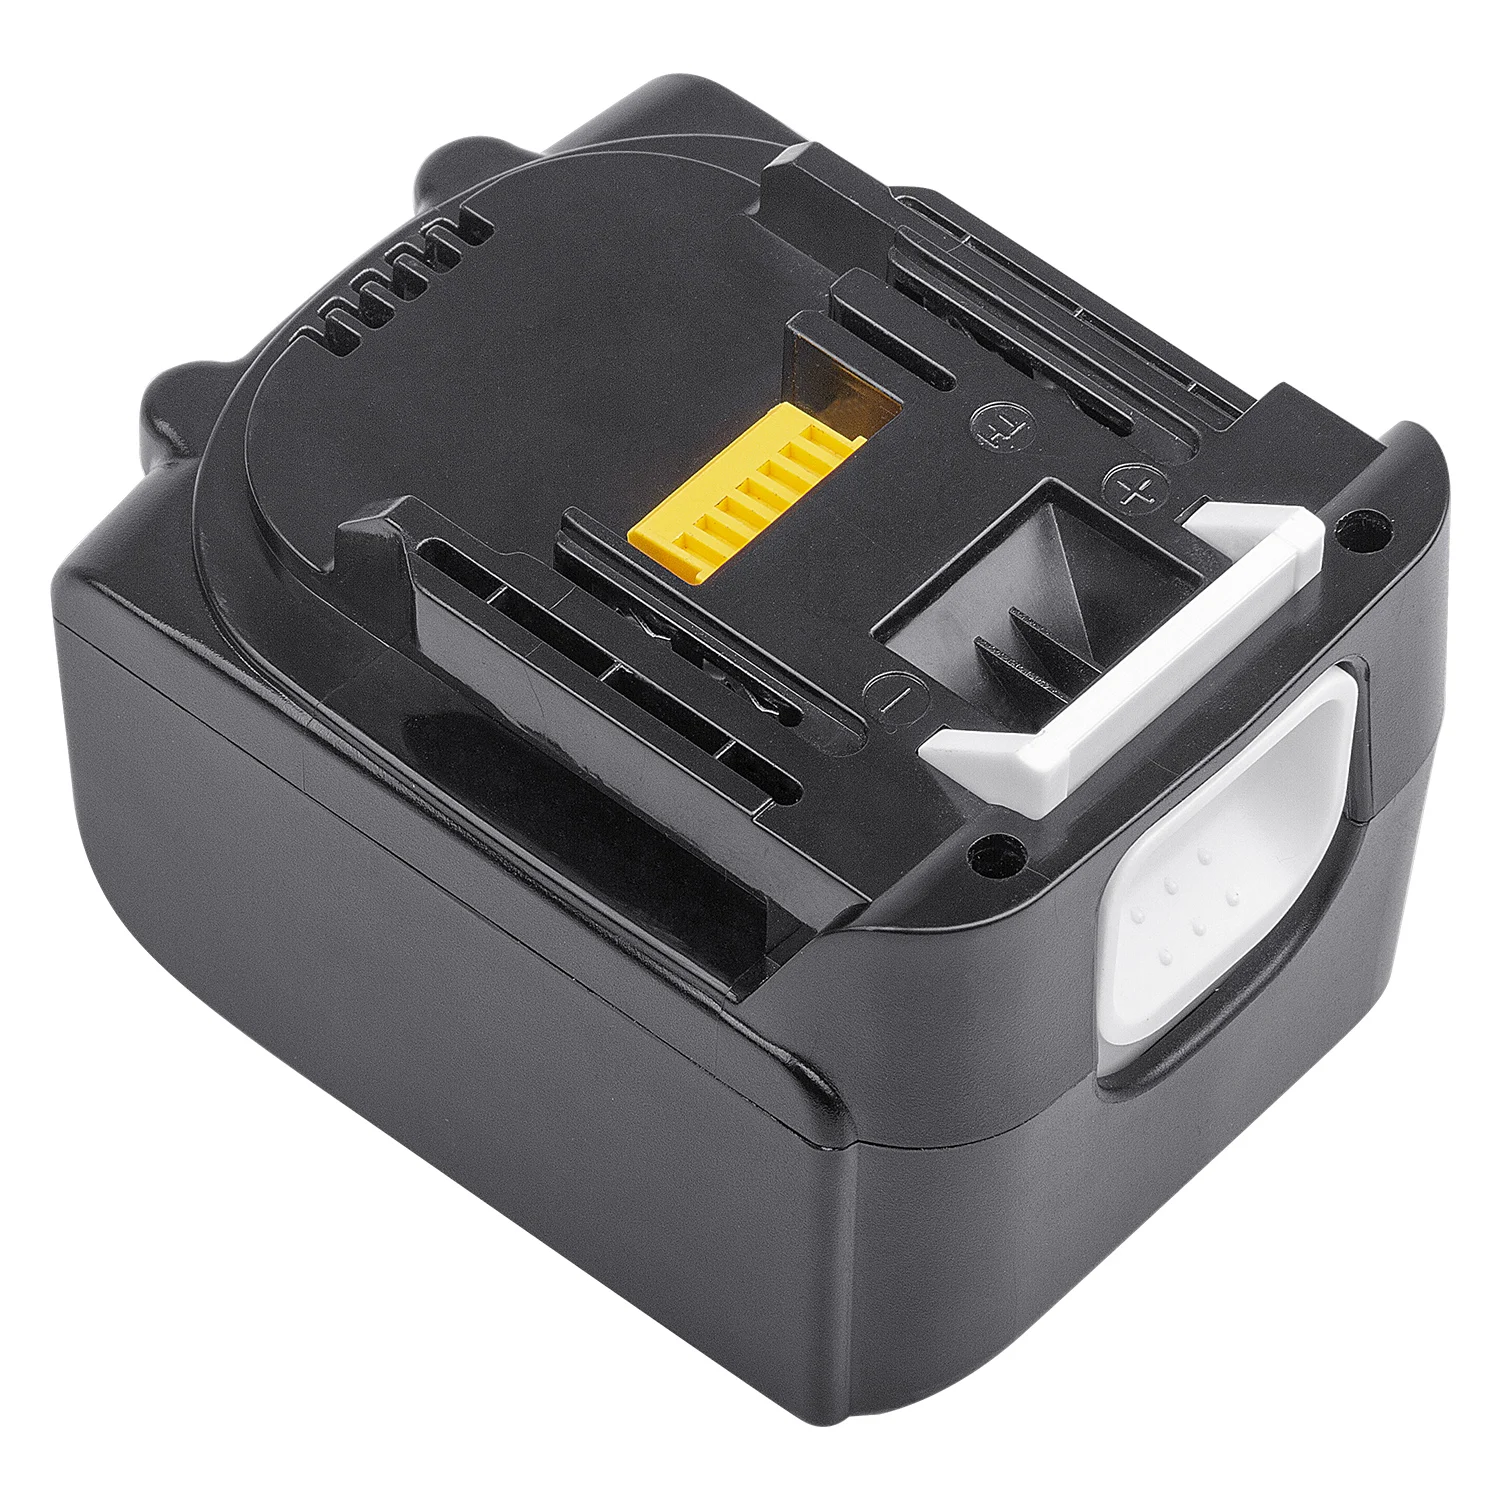 Løft dig op Dominerende scaring Replacement For Makita 14.4v Power Tools Battery Bl1430 Bl1450 Bl1460  Lithium Ion Battery - Buy High Quality Lithium Ion Battery,Drill Power  Tools,Power Tools Battery Product on Alibaba.com